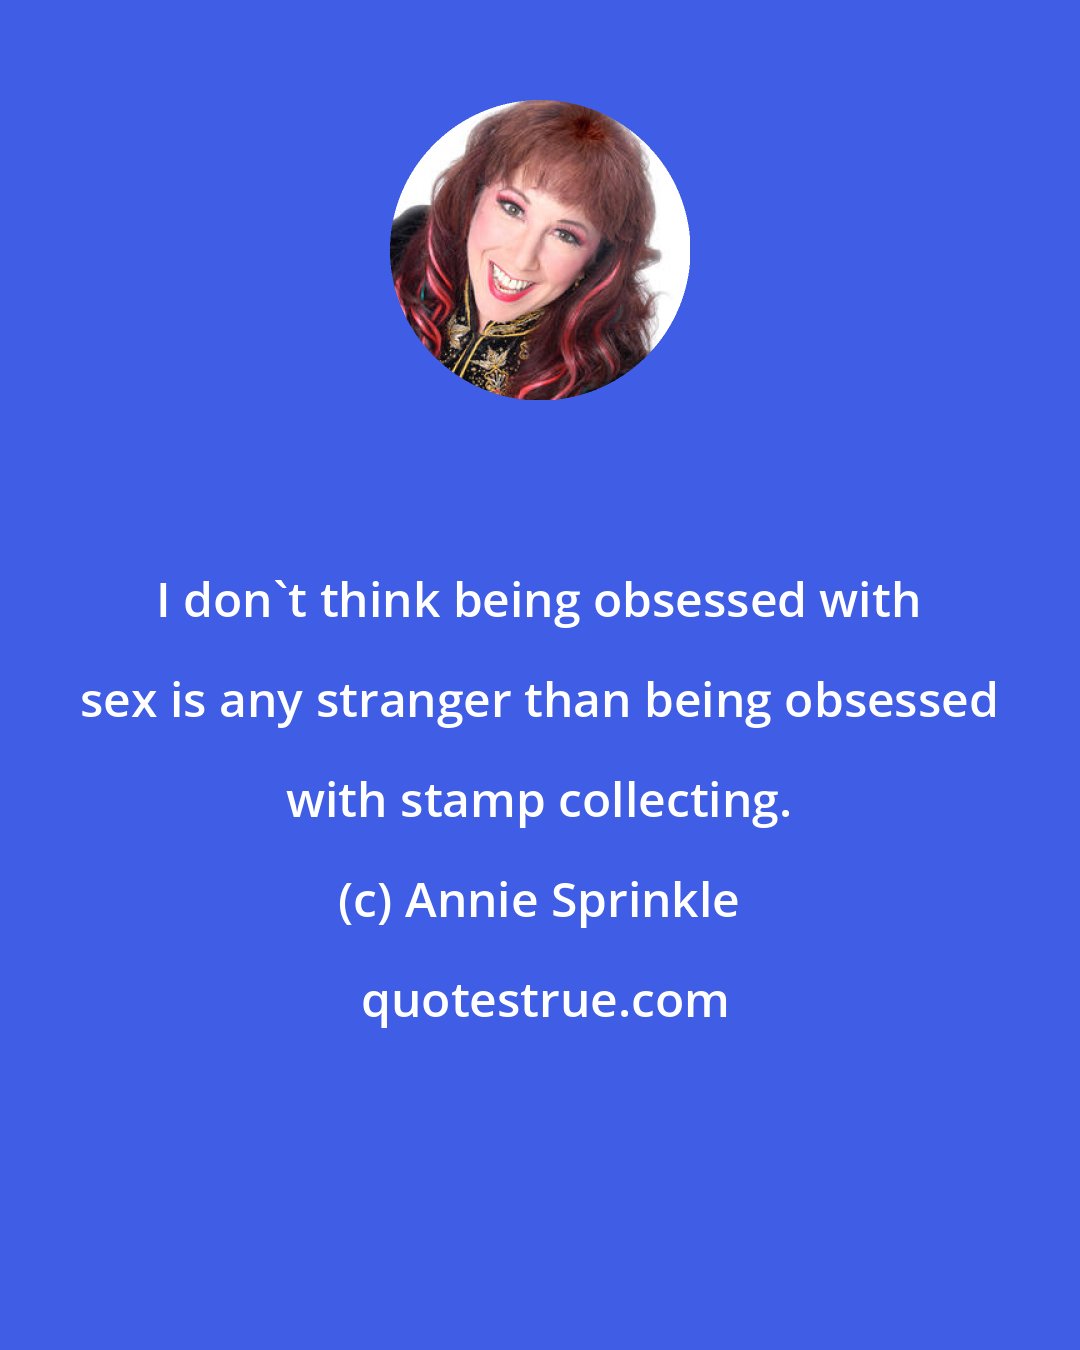 Annie Sprinkle: I don't think being obsessed with sex is any stranger than being obsessed with stamp collecting.